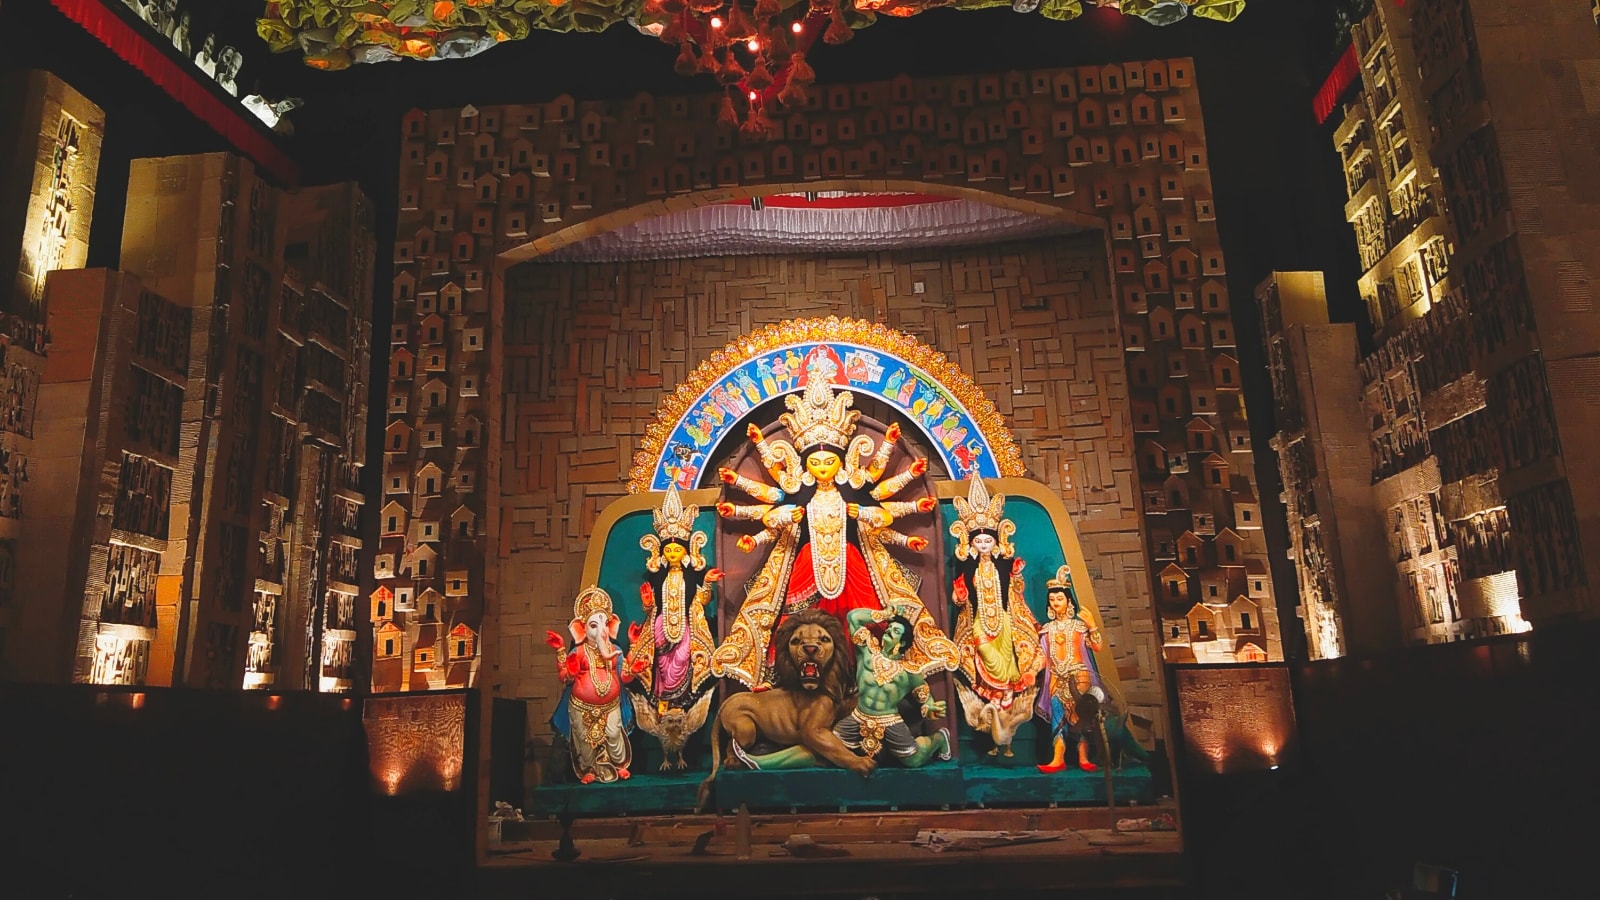 Vow to Build Better Lives for The 'Dreammakers': Construction Workers The  Theme of Kolkata Durga Puja Pandal